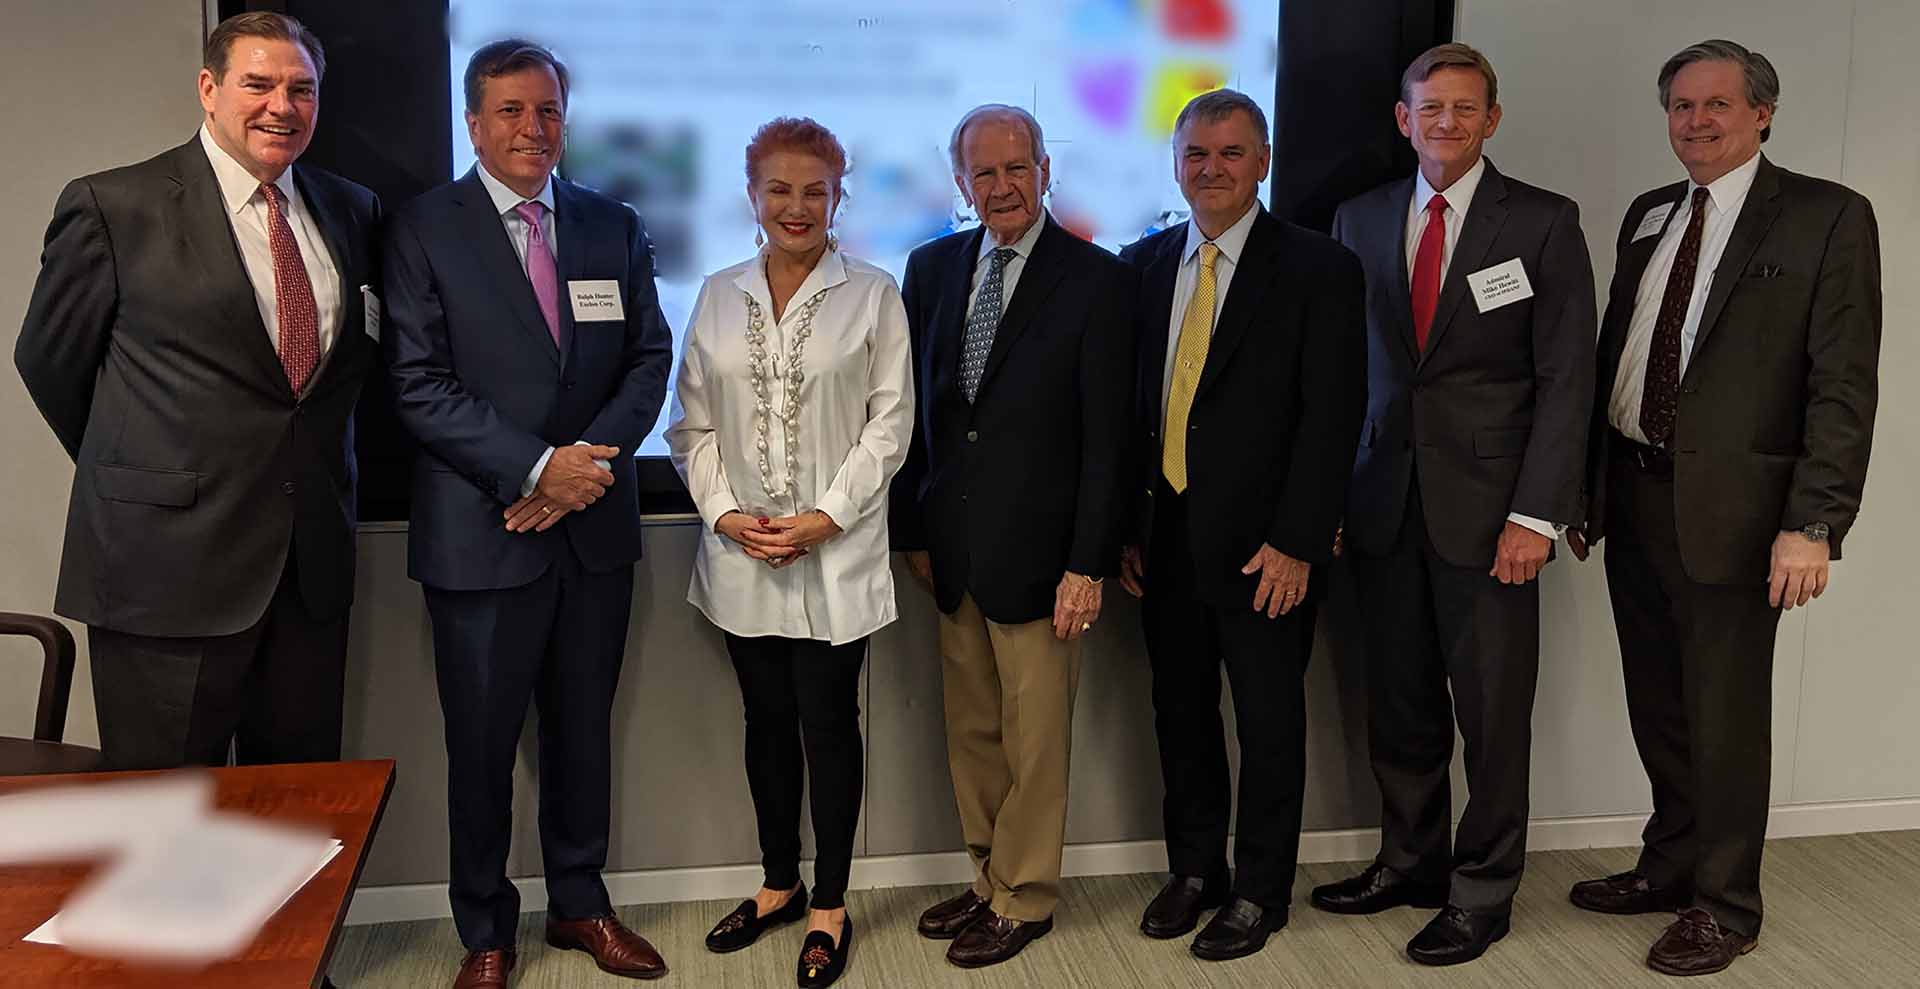 (Left to right) IP3 Chief Legal Officer Alan Dunn, Exelon Generation VP and Exelon Nuclear Partners COO Ralph Hunter, U.S. Ambassador to Poland Georgette Mosbacher, IP3 Co-founder and Director Robert McFarlane, IP3 Director James Cartwright, IP3 Co-Founder and CEO Michael Hewitt, and Environmental Business International Principal Andrew Paterson.